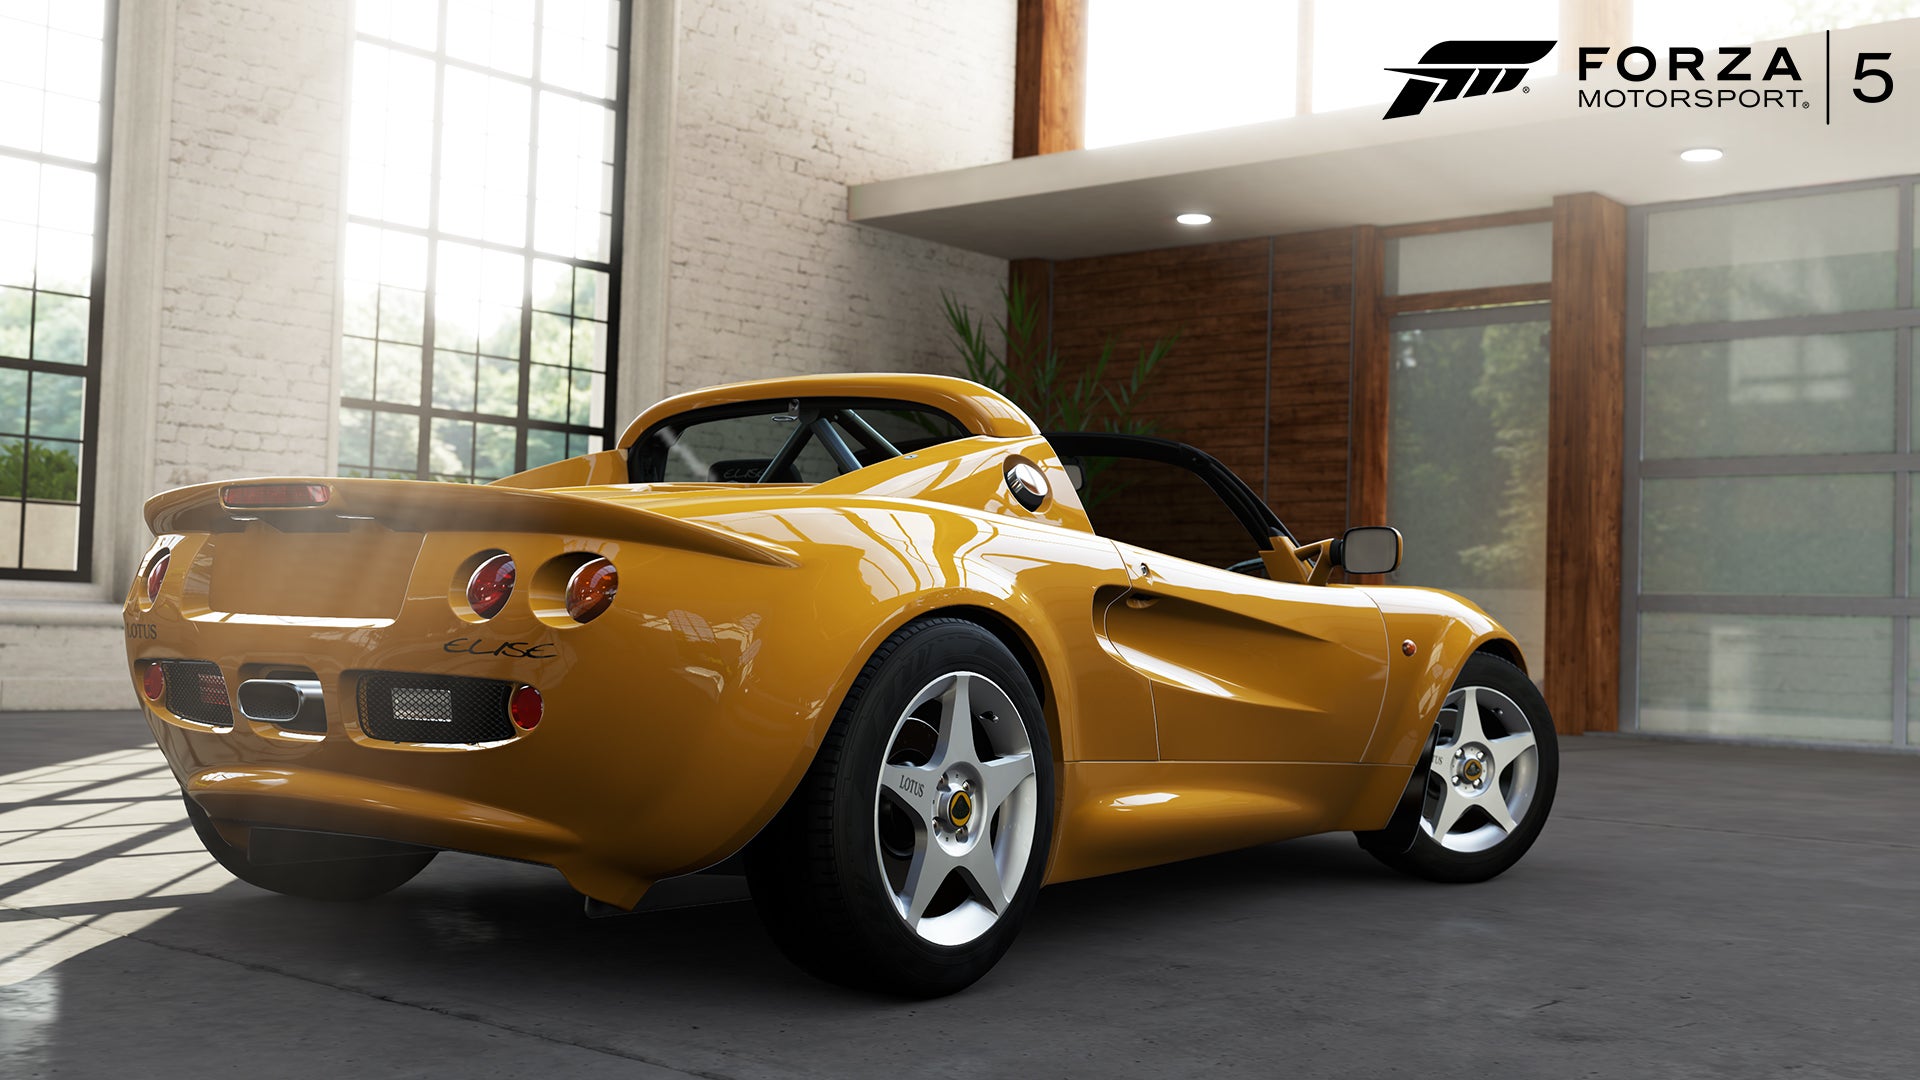 Image for Forza 5 Top Gear pack now available, race The Stig's 'digital cousin' in online event